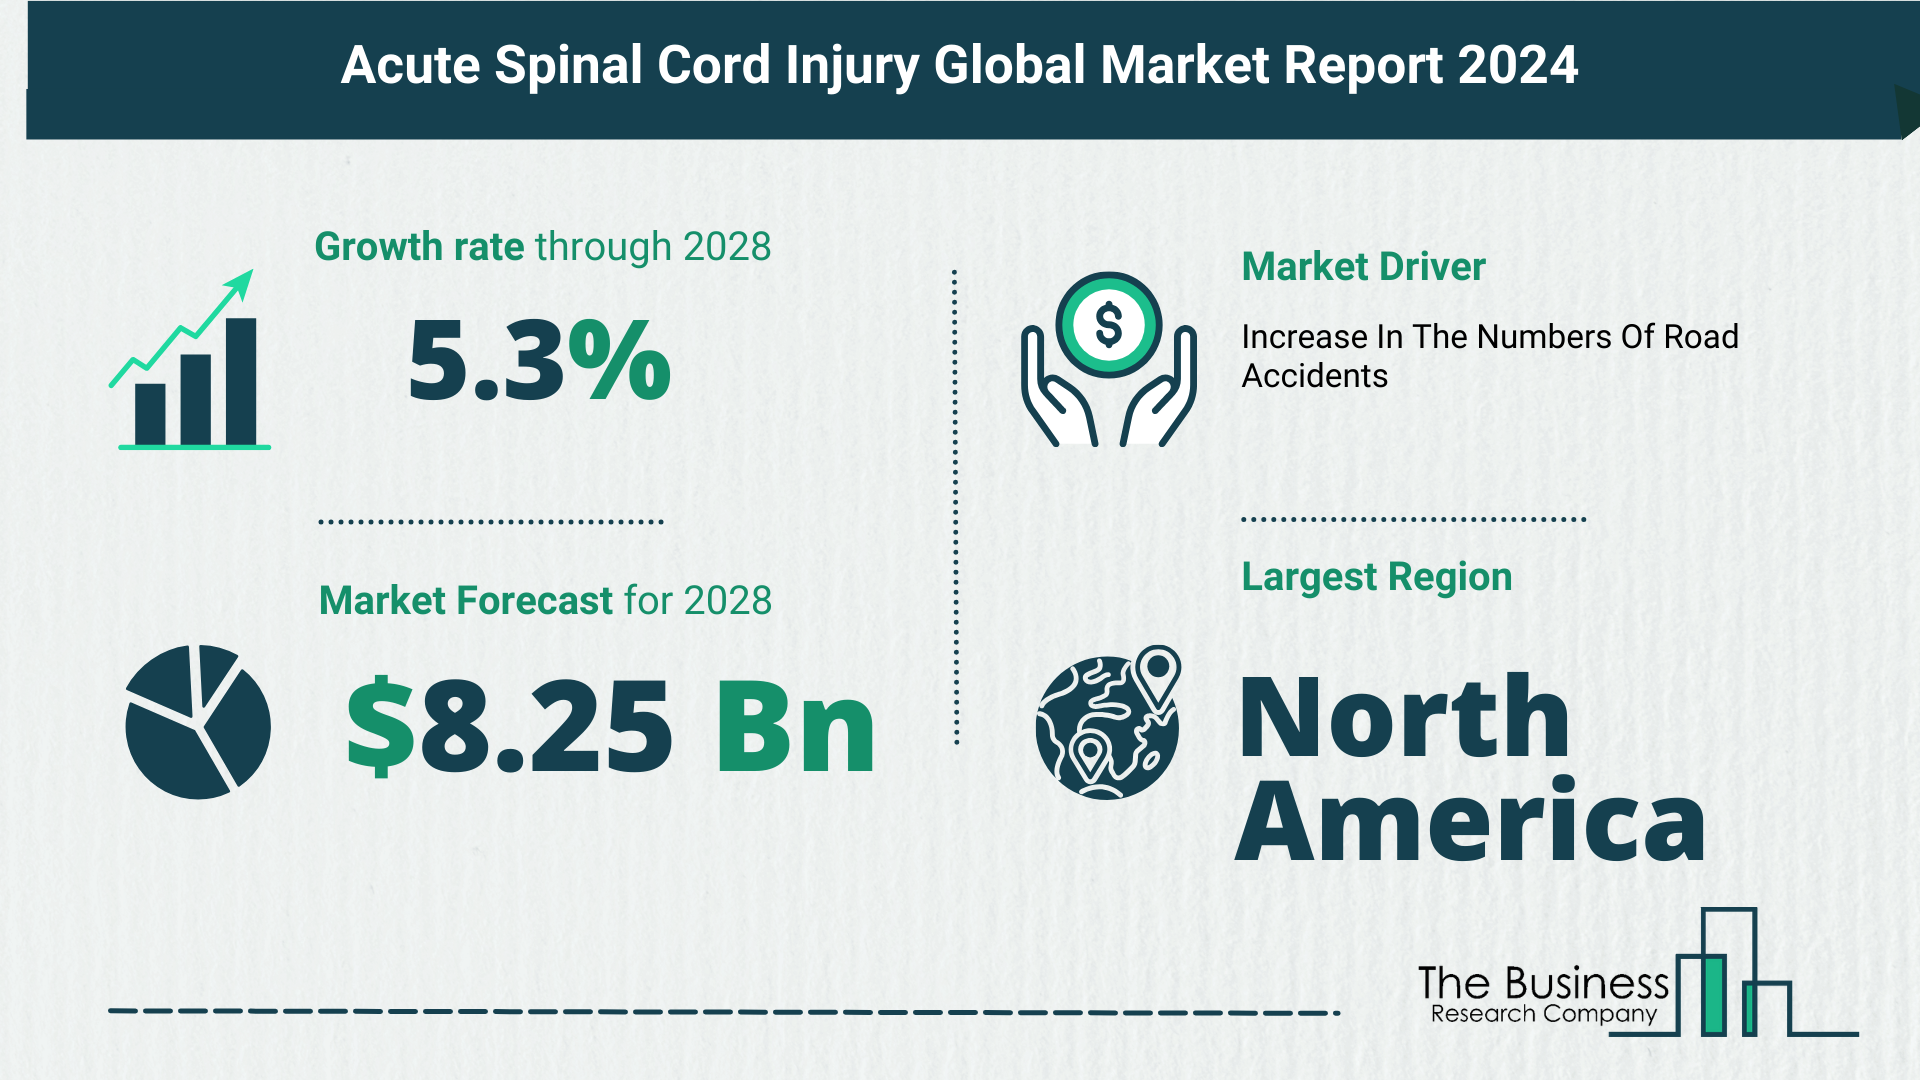 Global Acute Spinal Cord Injury Market